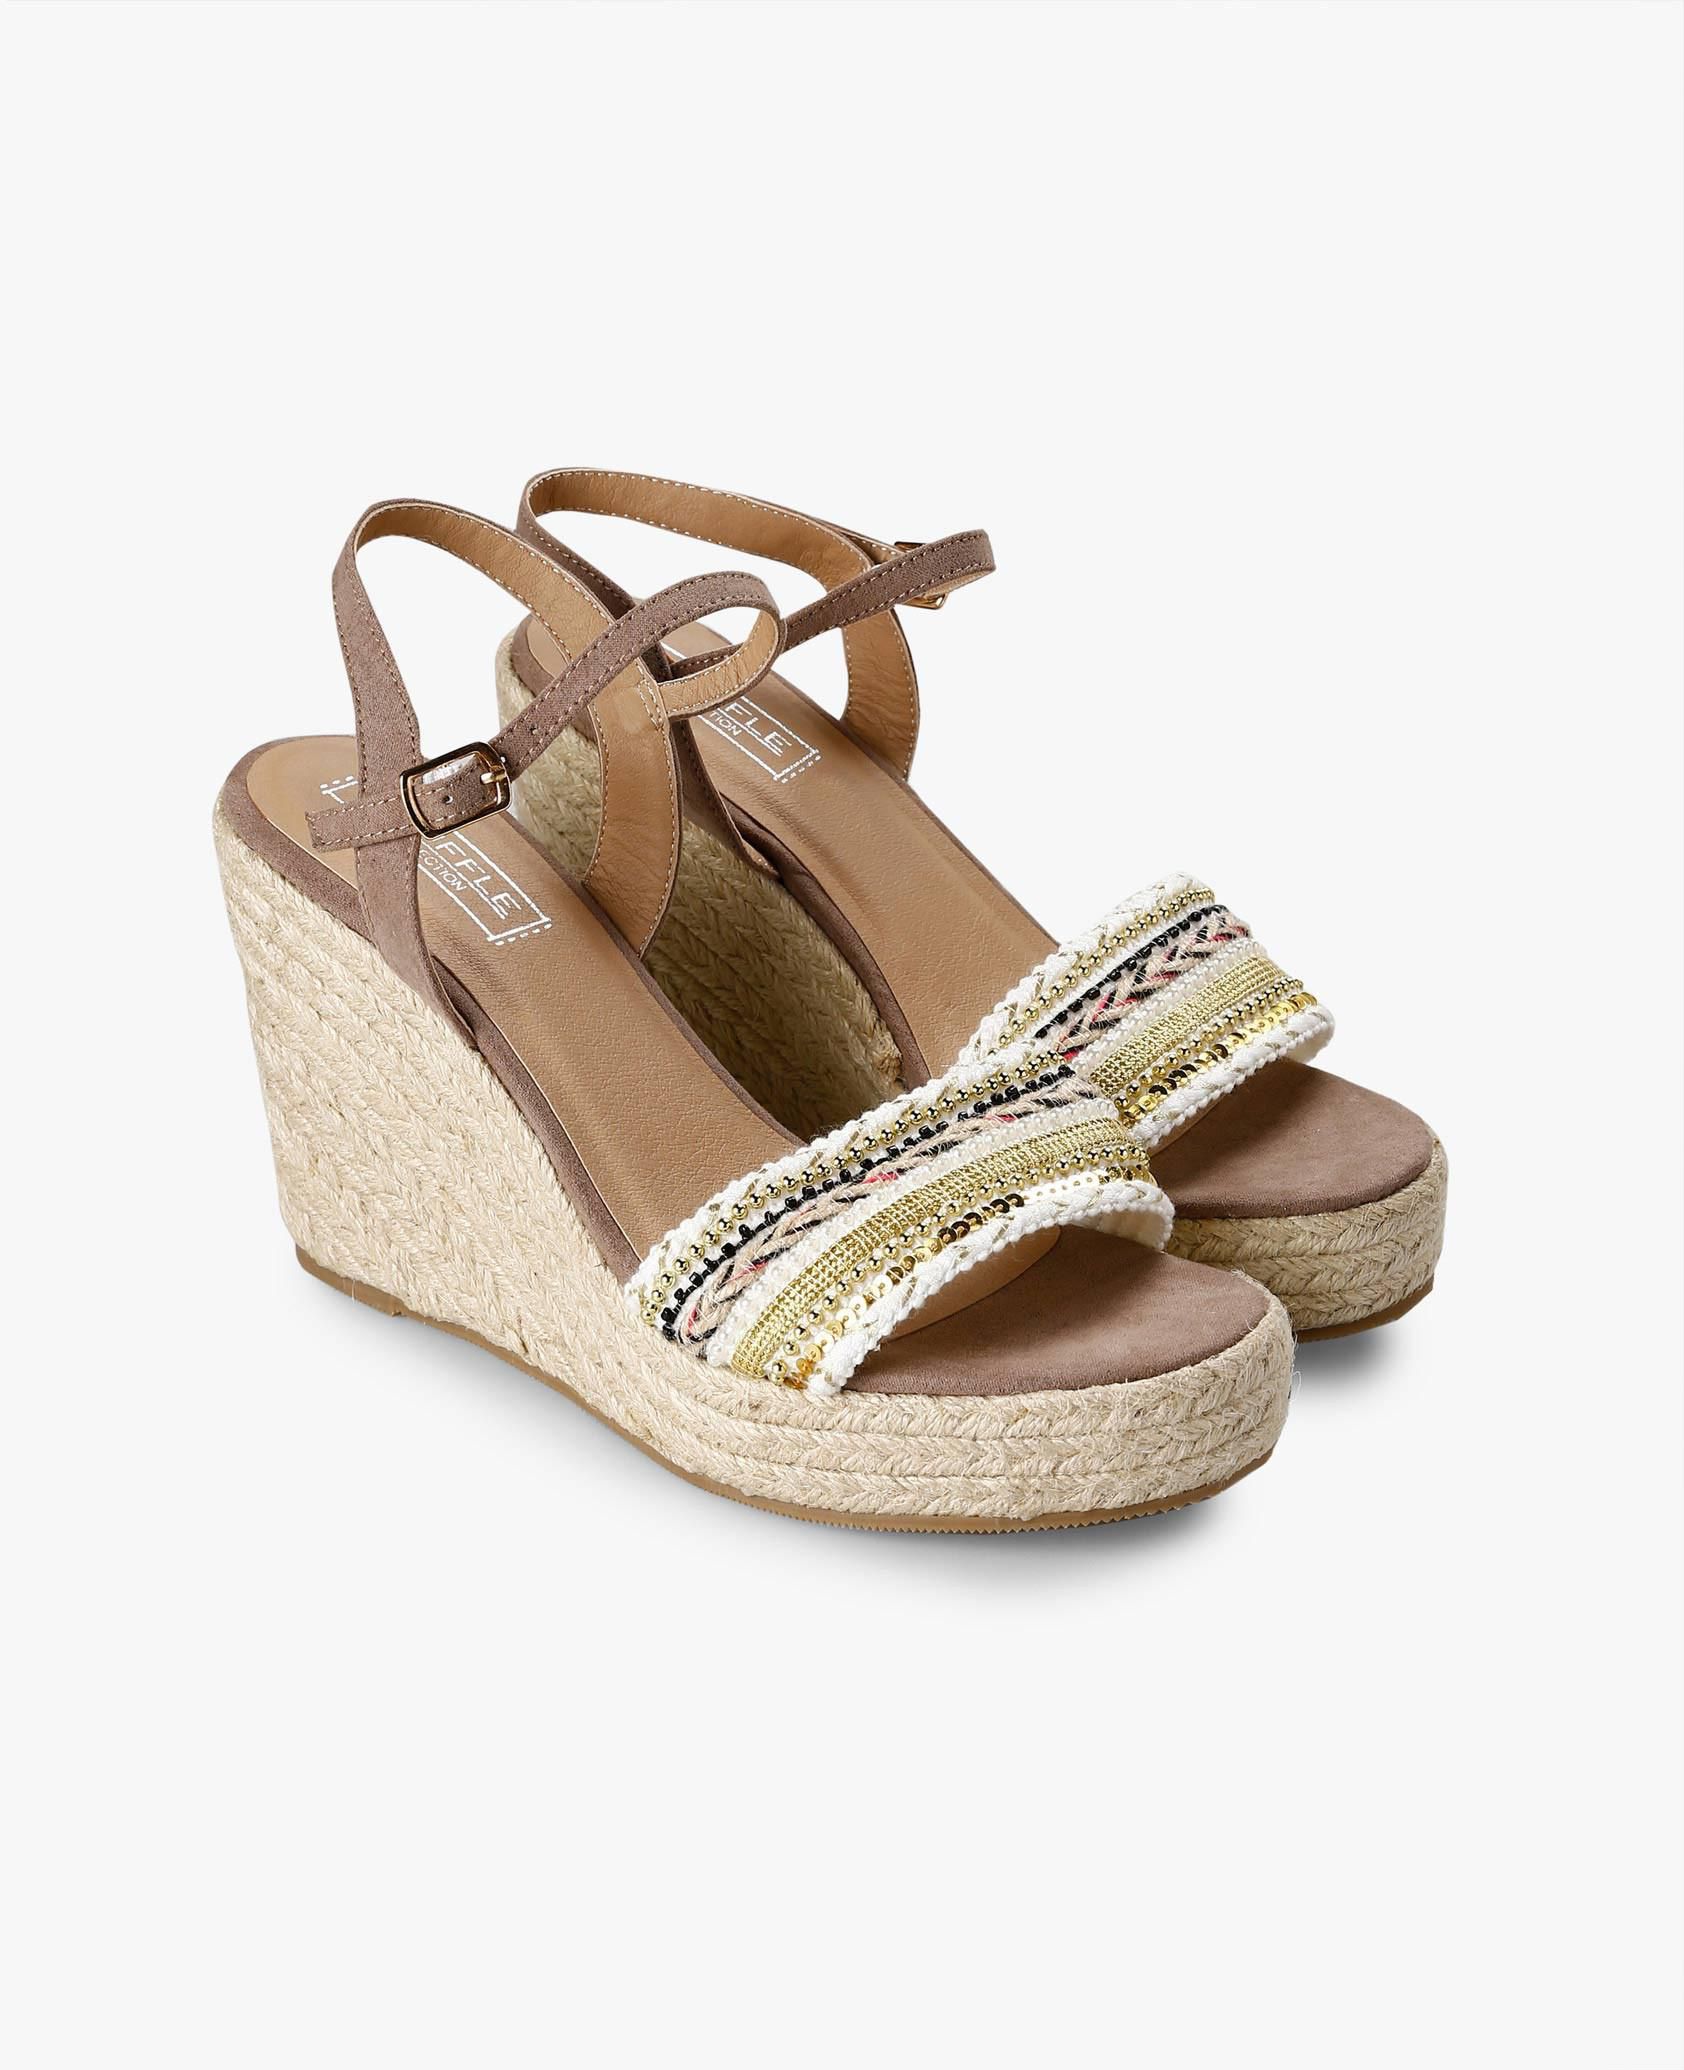 Off White Embroidered Wedge Sandals